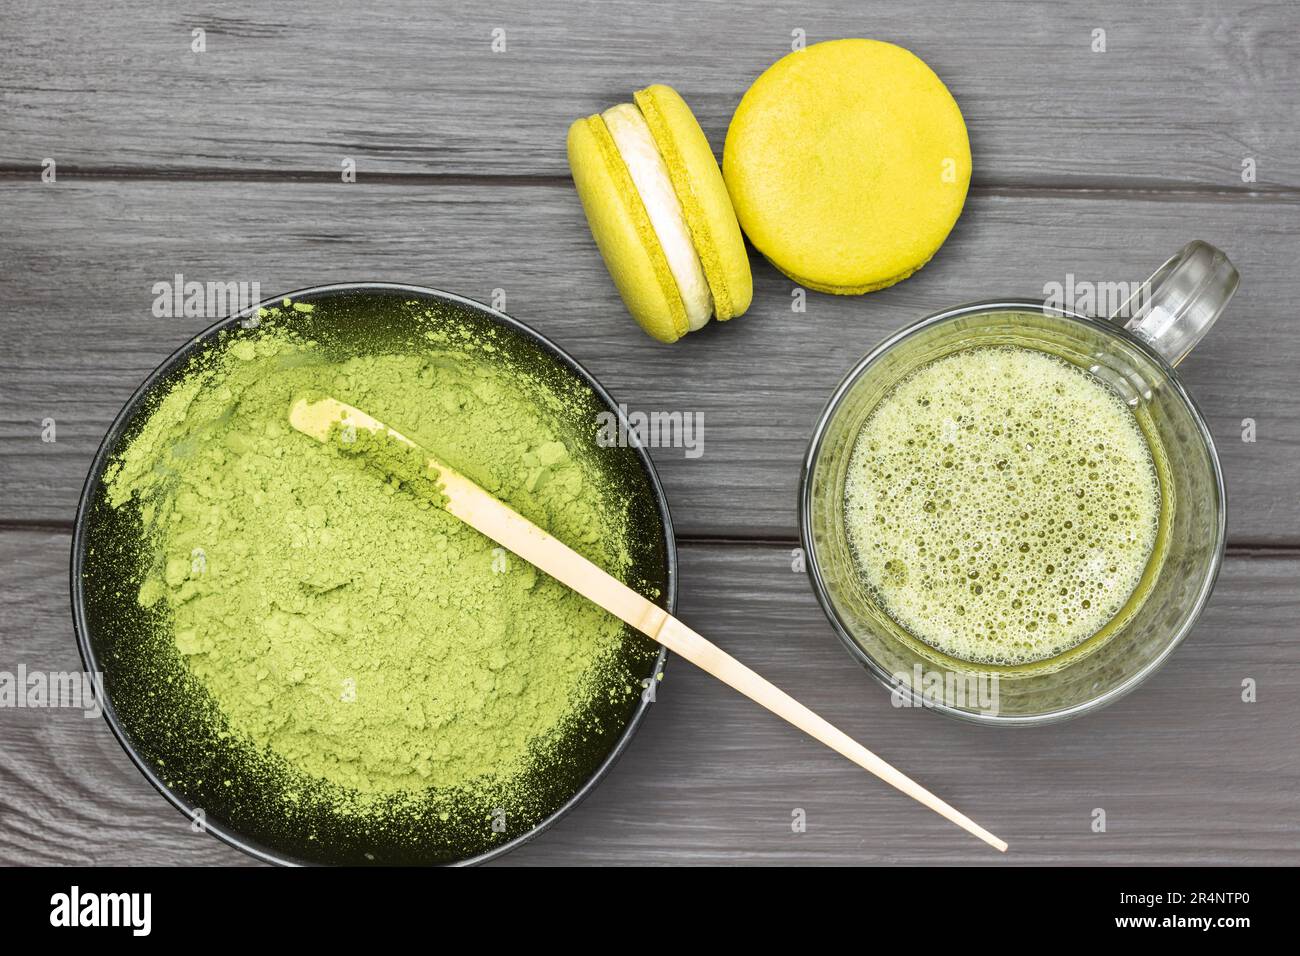 Two macaroni cakes and mug of matcha green tea. Measuring spoon in bowl with matcha powder. Dark wooden background. Stock Photo